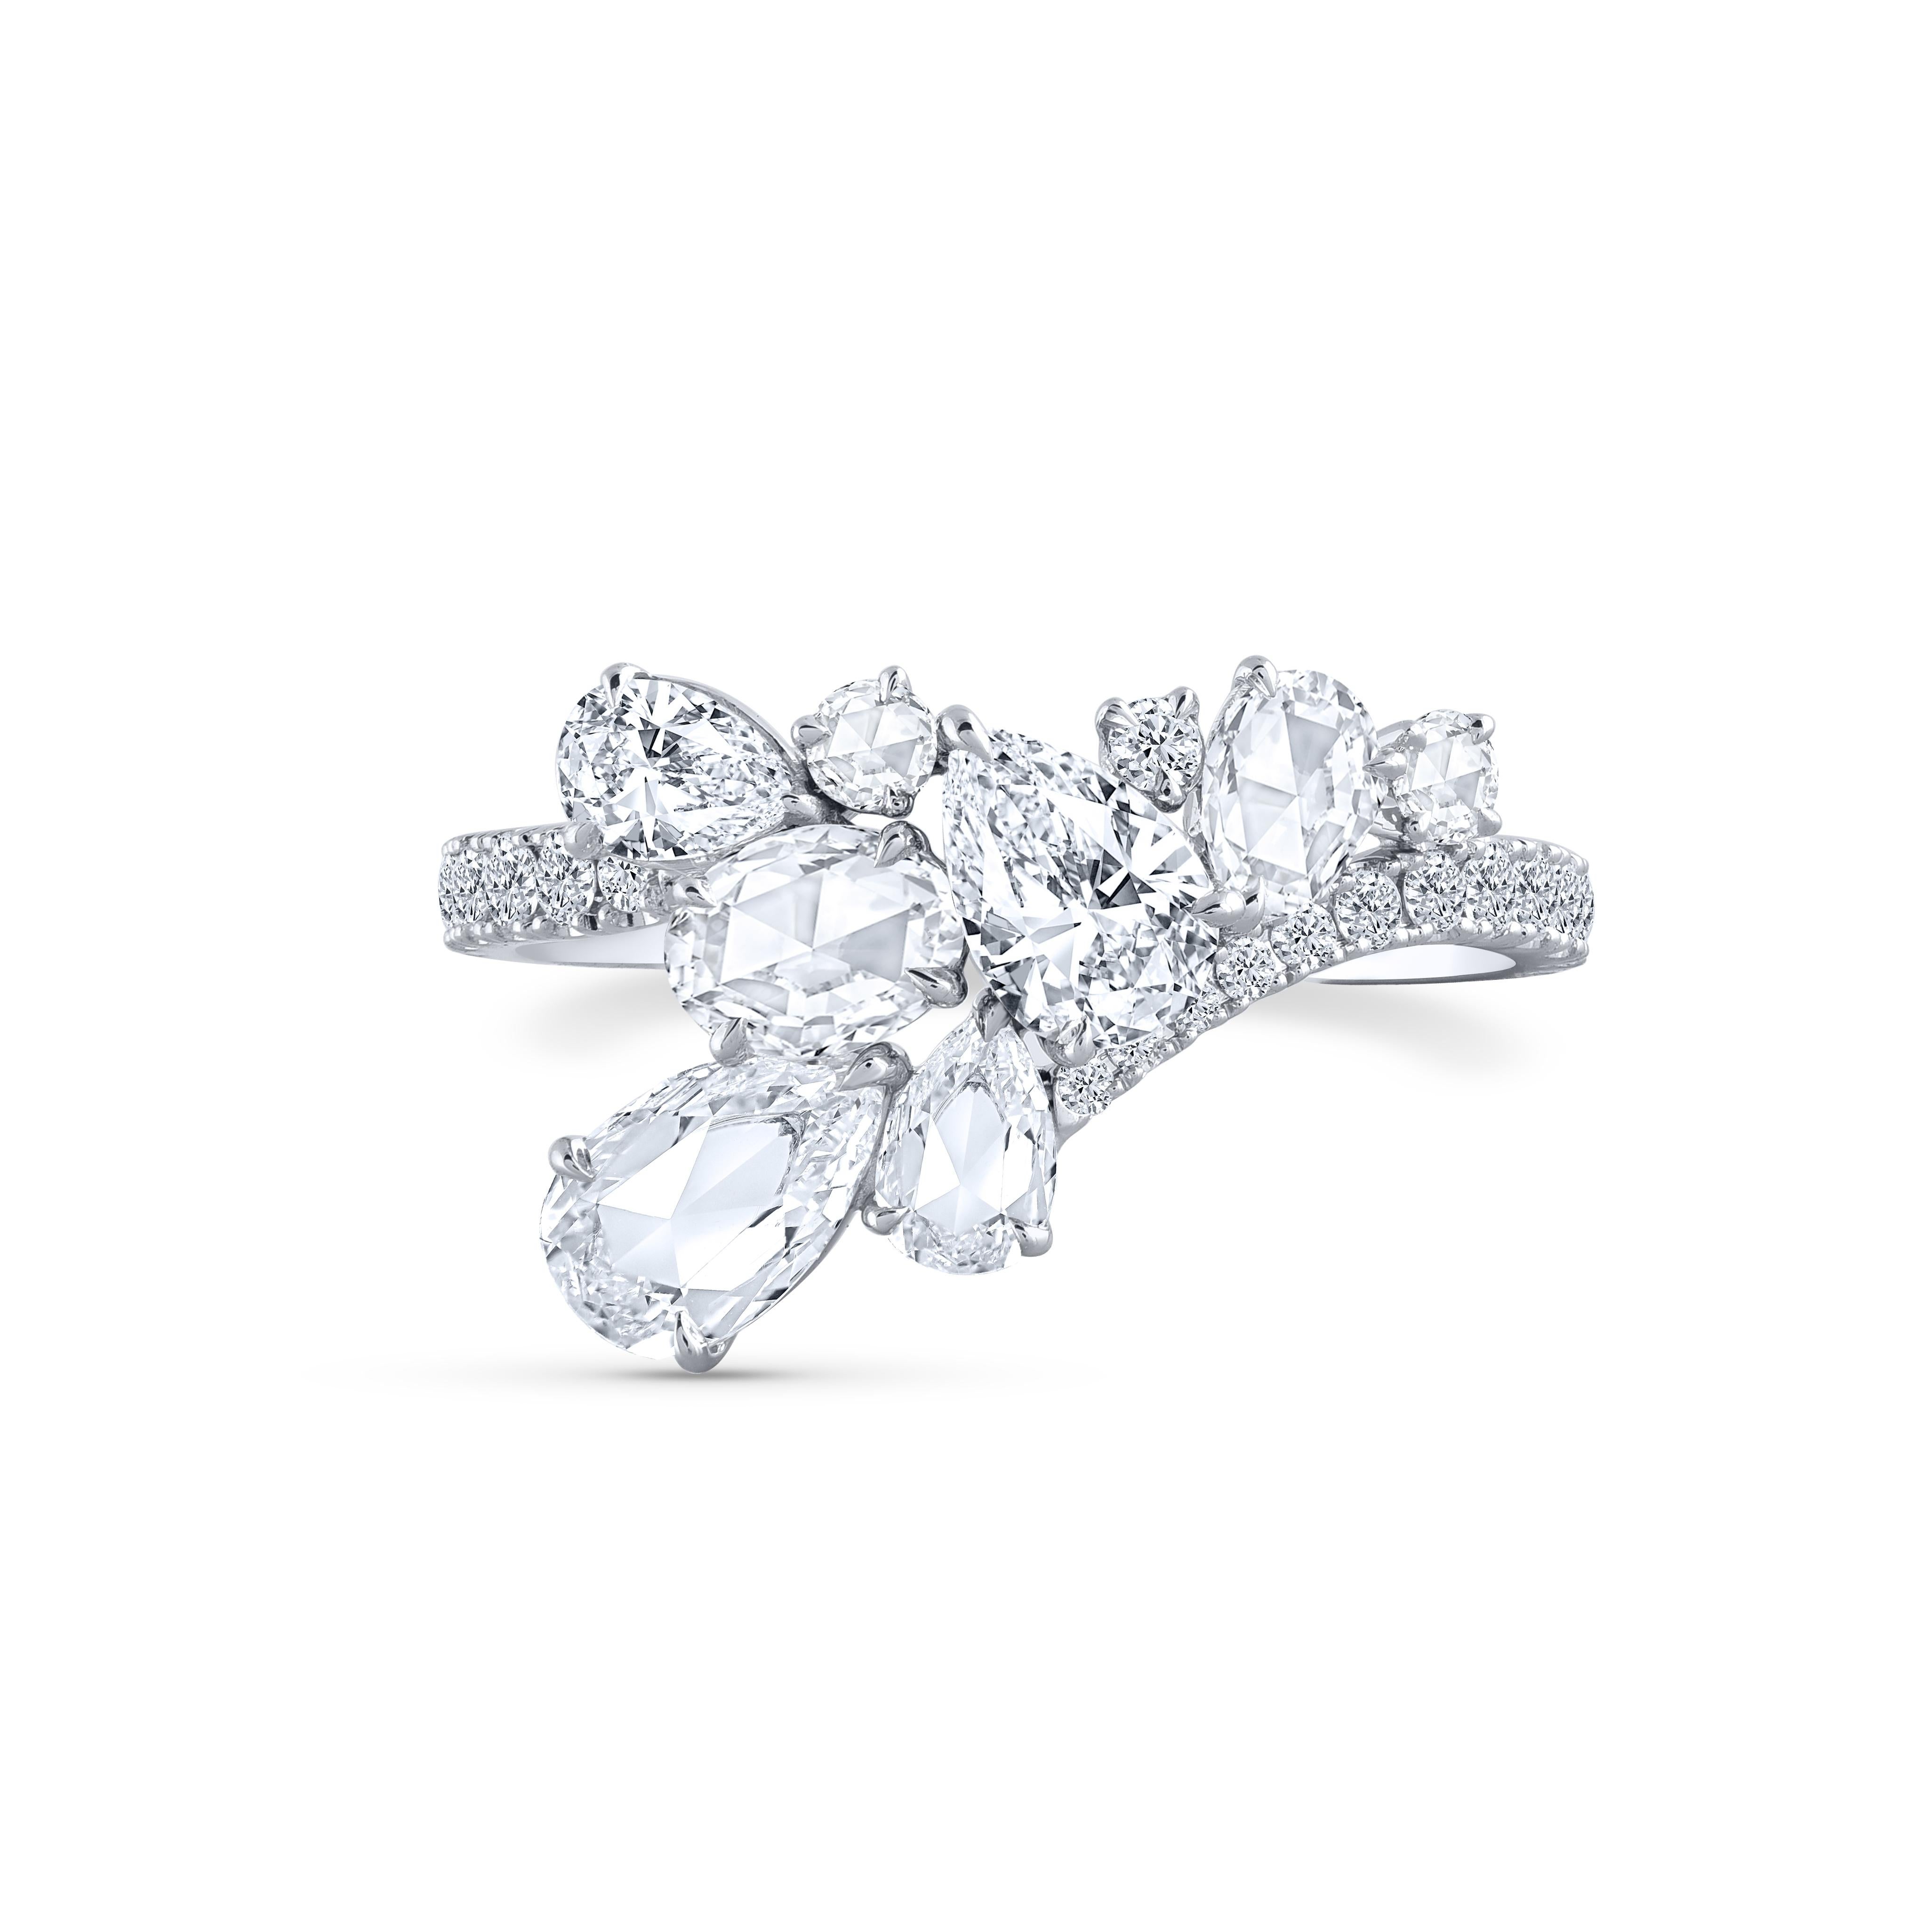 A beautiful arrangement of brilliant and rose cut diamonds come together to create this ring which is a part of our Cascade collection. Studded with 30 round, 3 pear, 1 rose cut round 2 rose cut pear diamonds. 

Inspired by the beauty of the